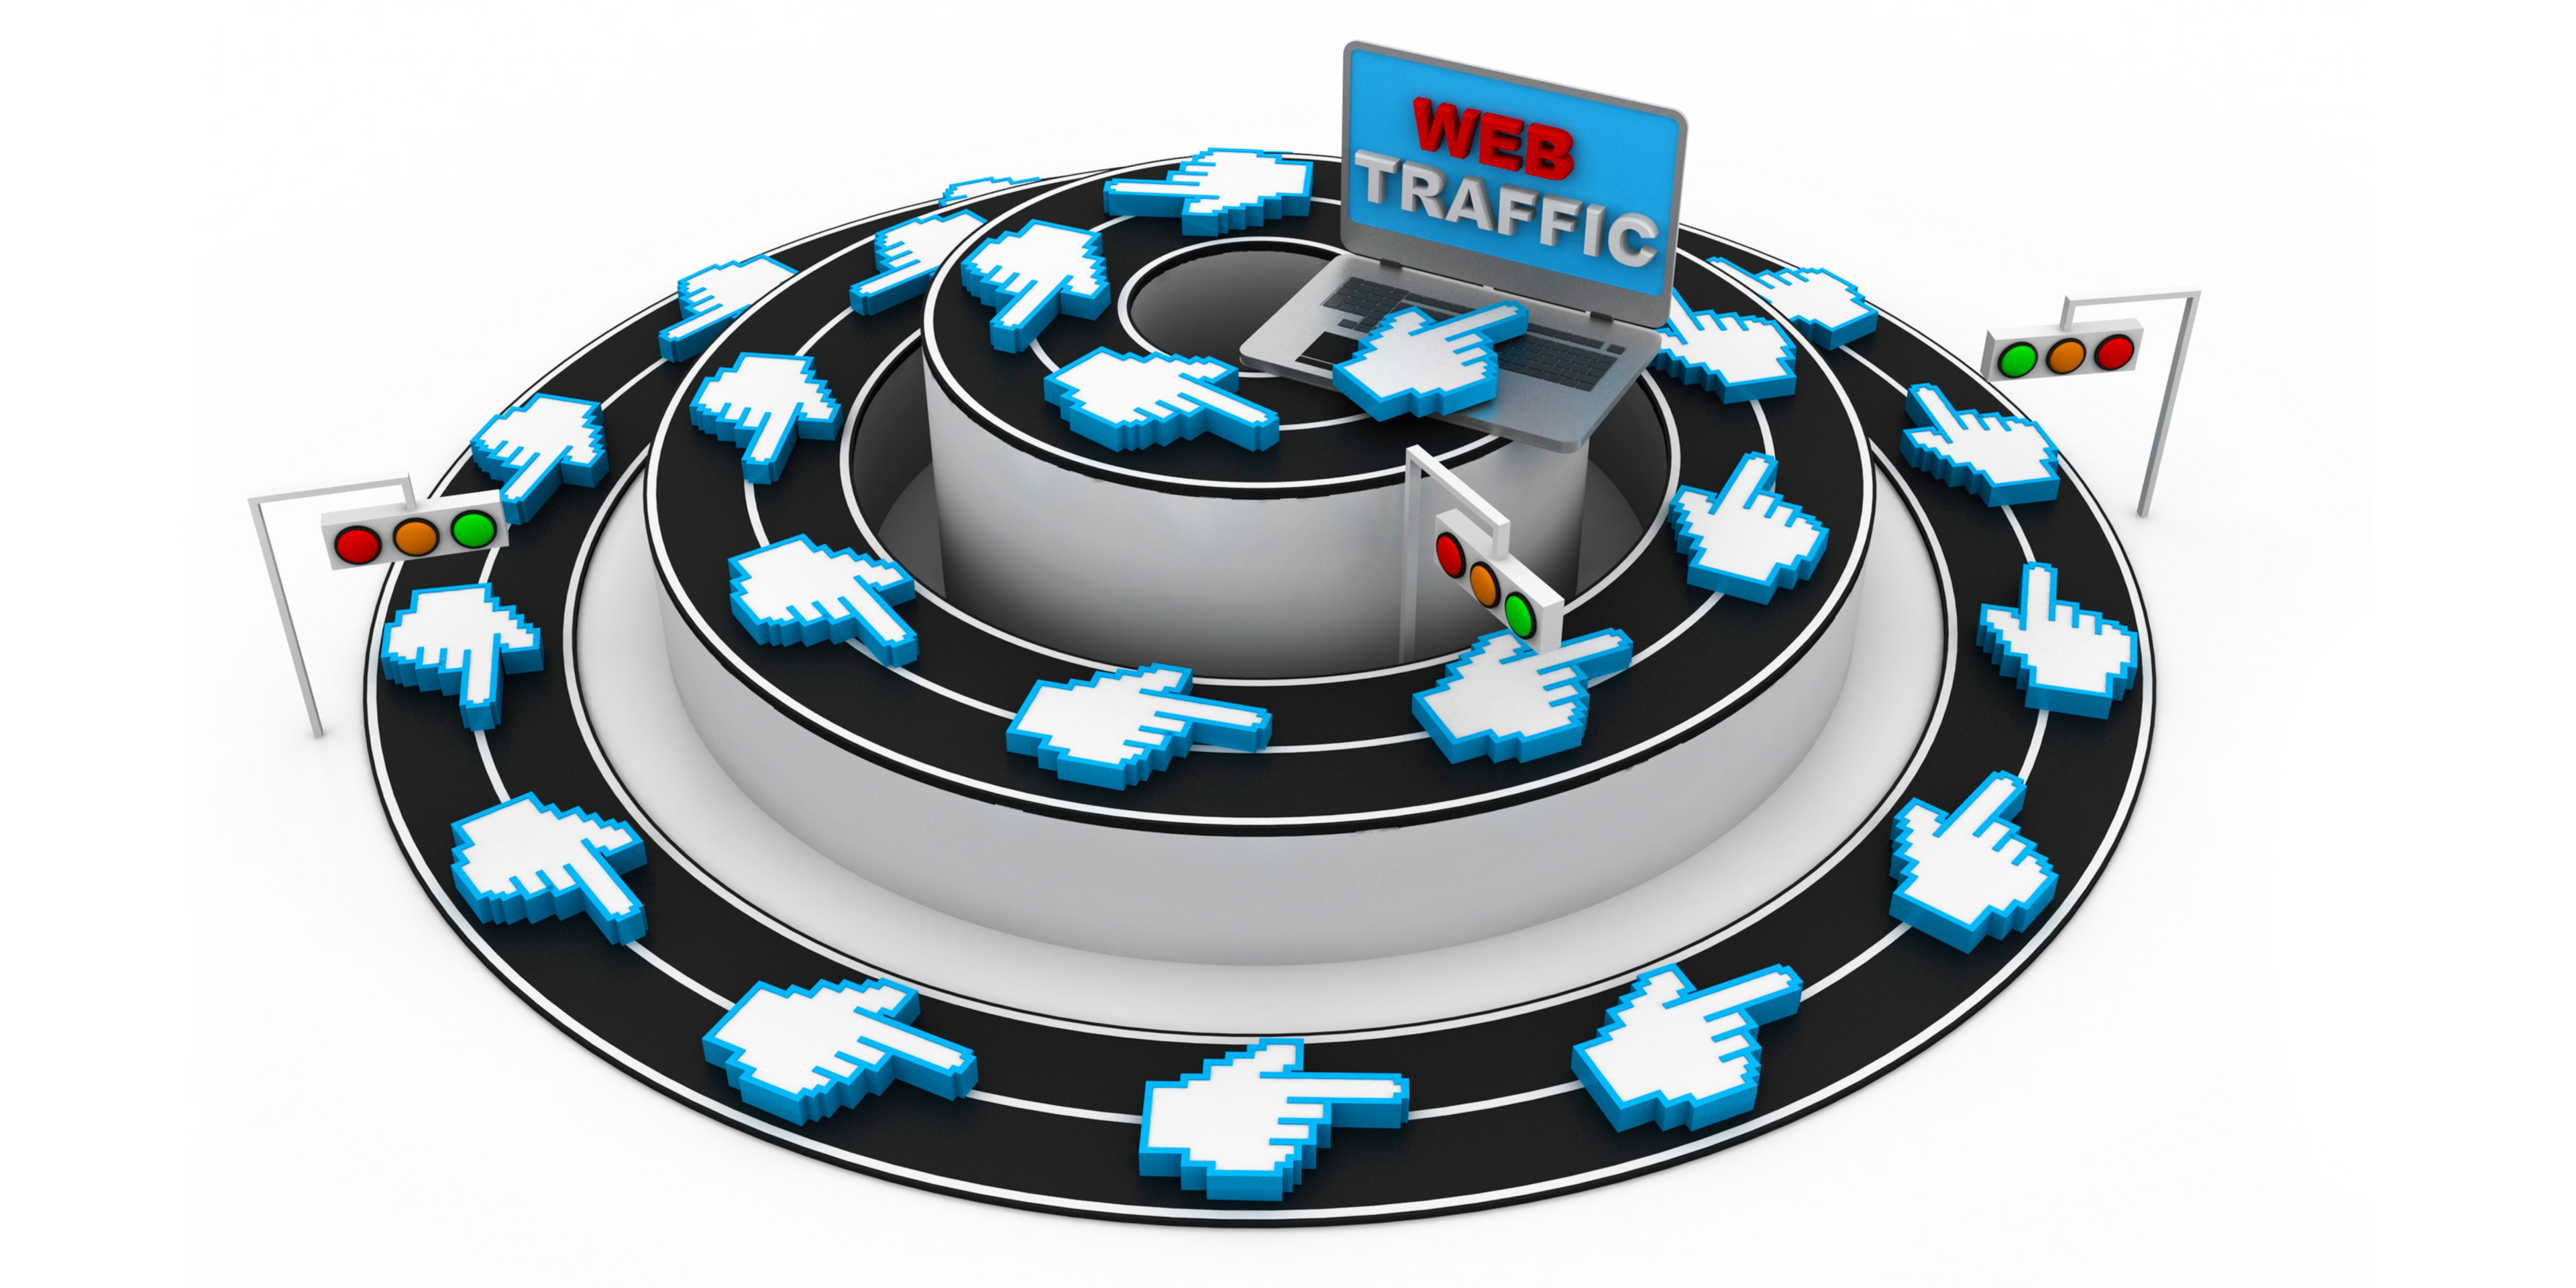 A well-defined content marketing strategy will increase traffic to your website by 2000%.